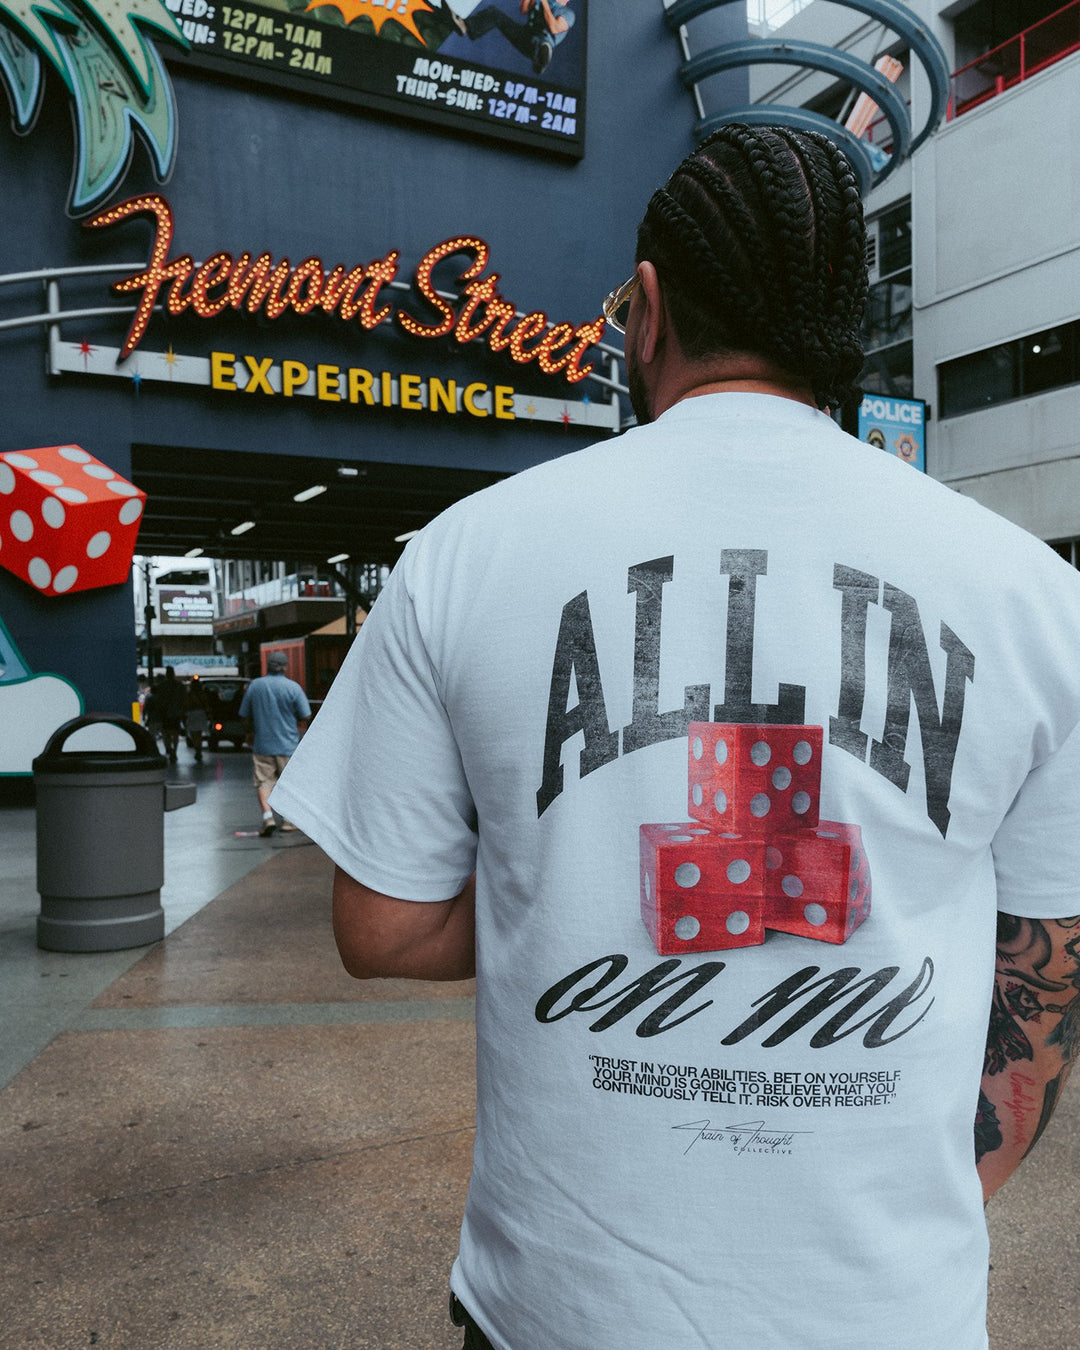 All in on me White Tee - trainofthoughtcollective